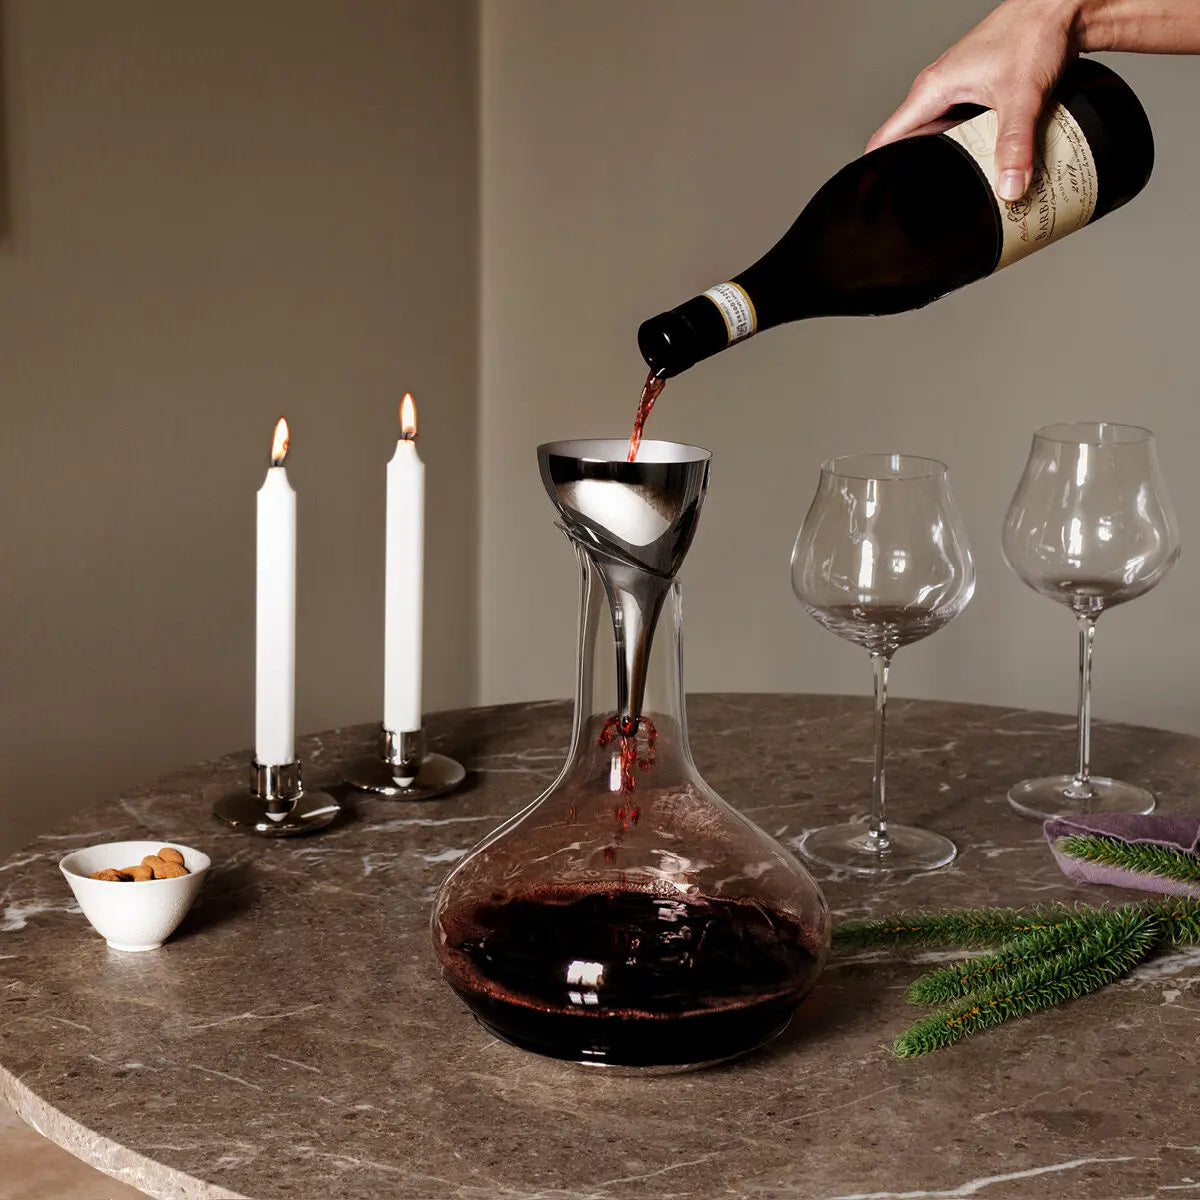 A person pouring wine through the Georg Jensen Stainless Steel Sky Wine Decanter Aerating Funnel with Filter set on a table